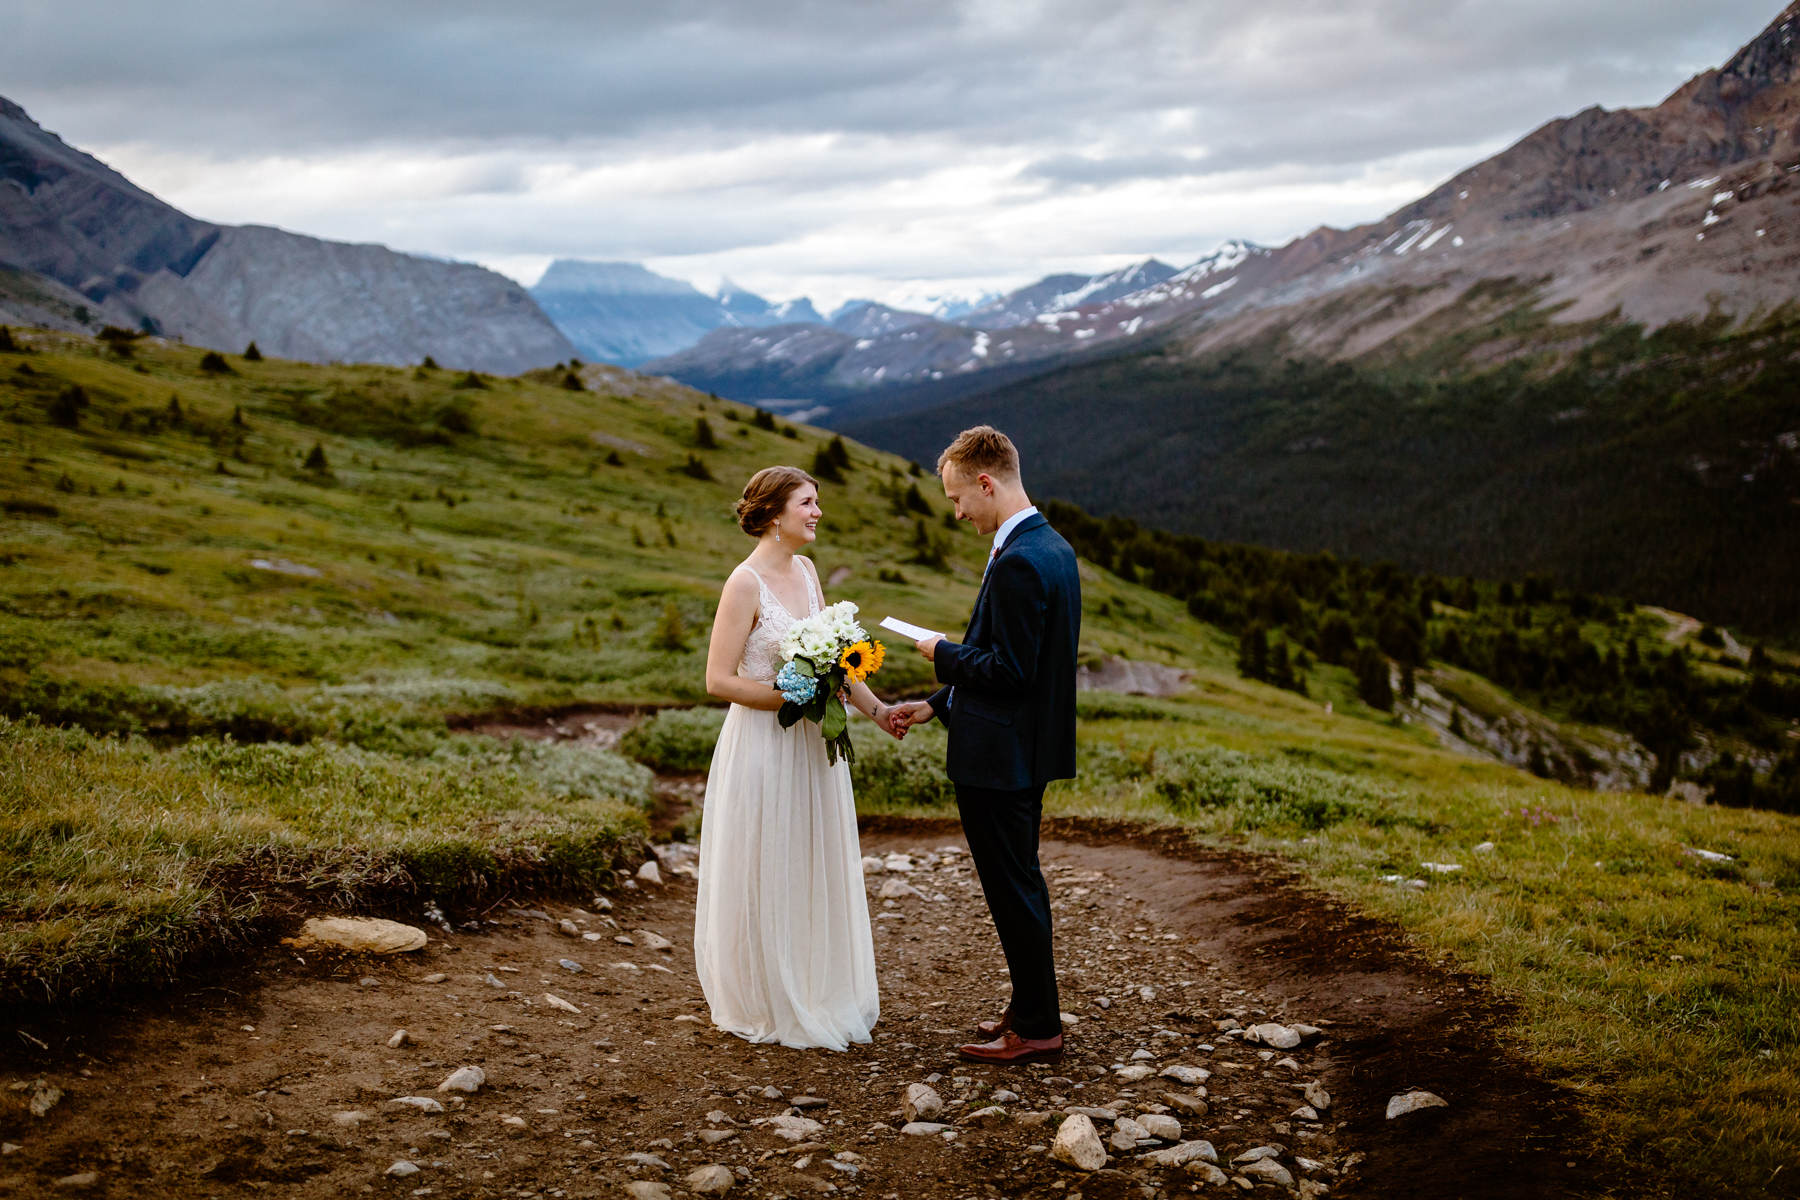 Hiking Elopement Photographers in Banff National Park - Photo 9